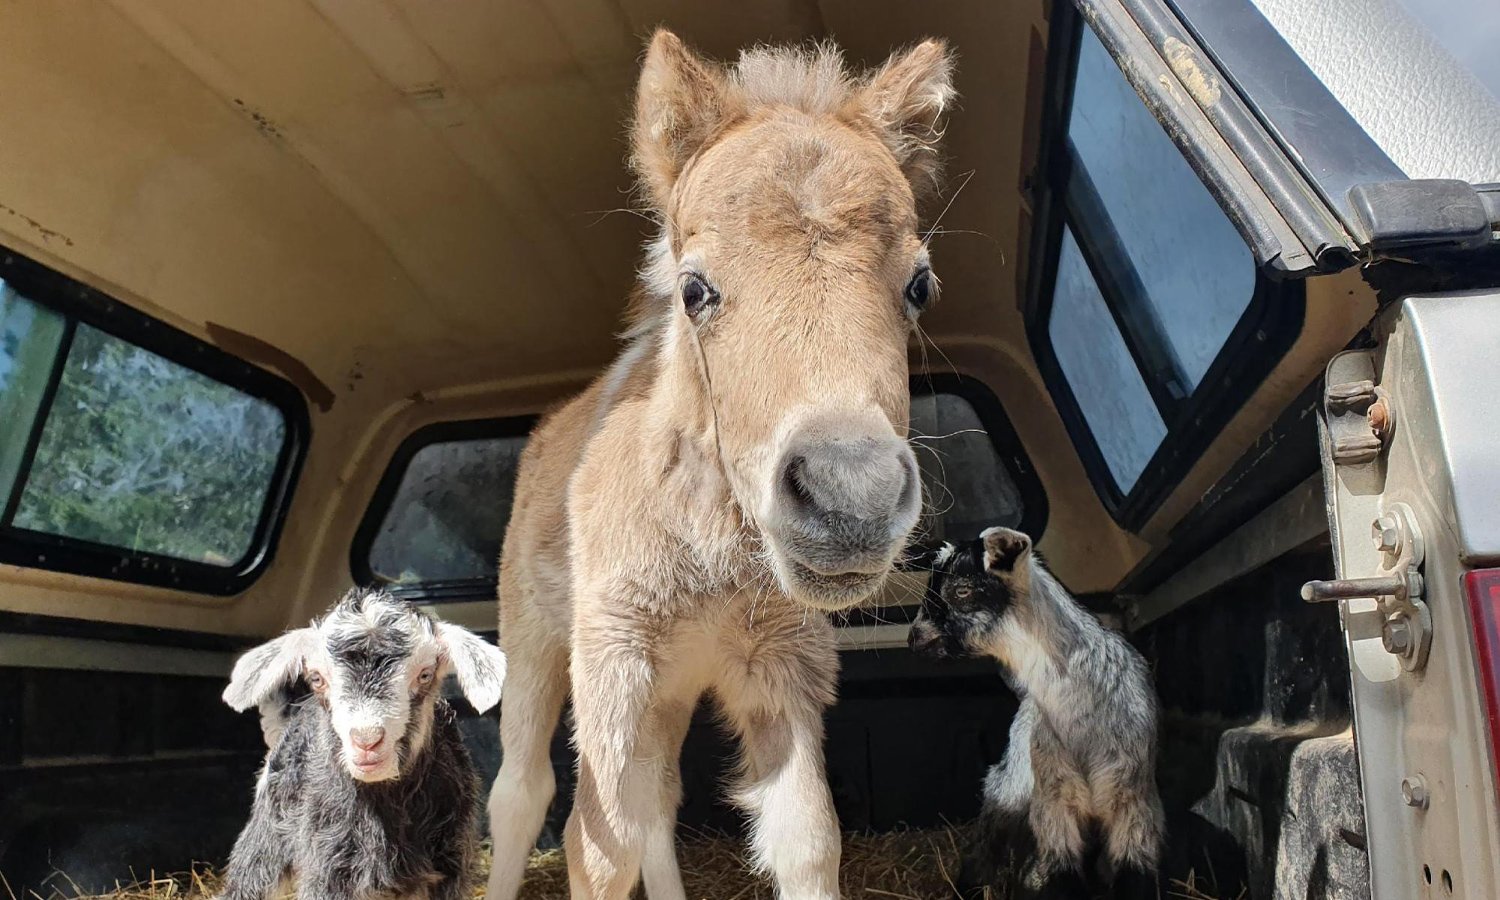 A light brown donkey and two baby goats in the back of a ute cab 